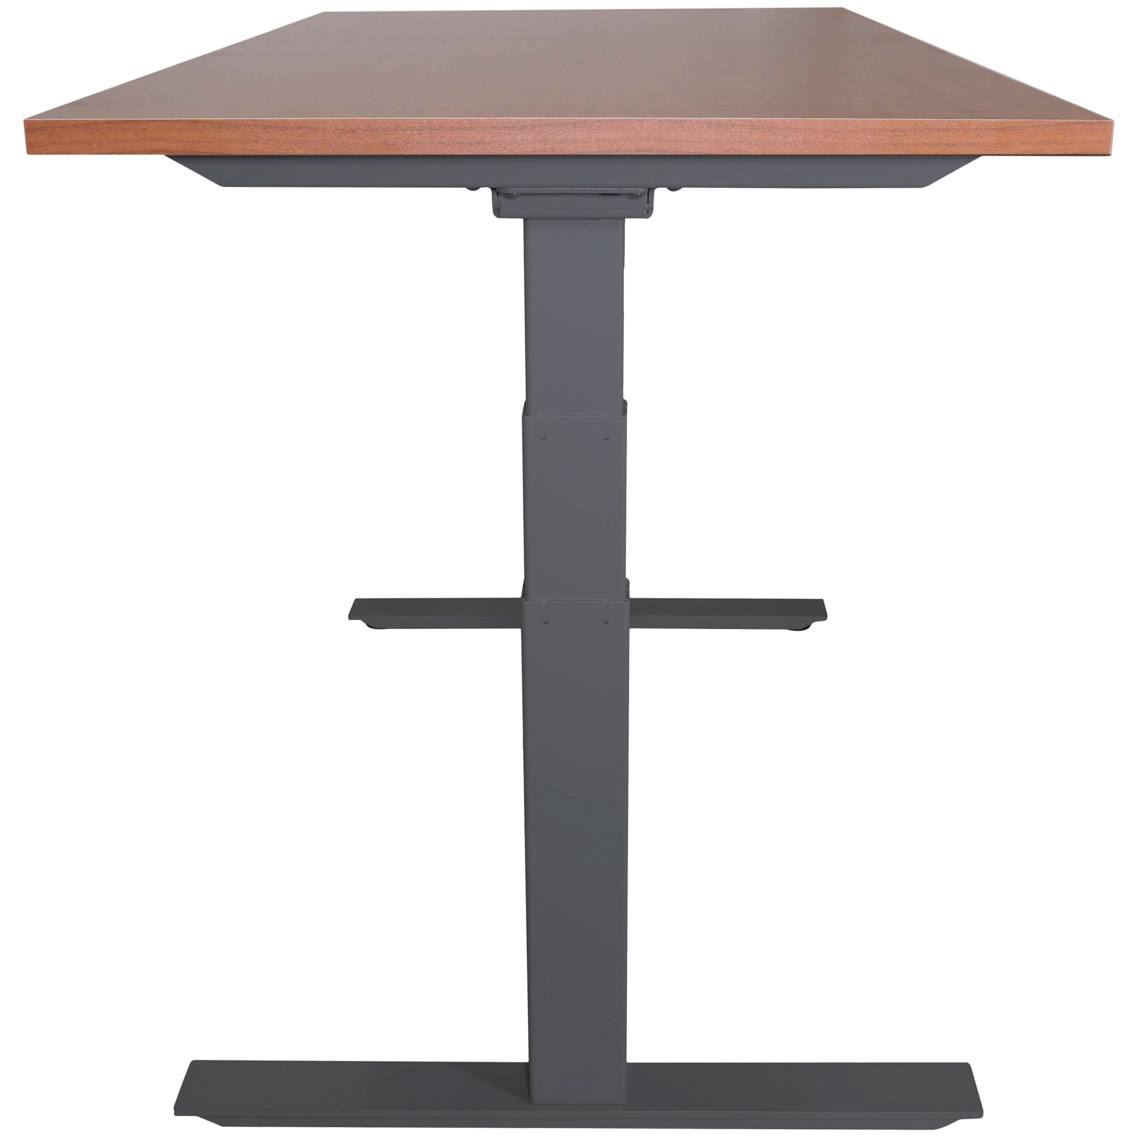 A6 Adjustable Sit To Stand Desk 24"- 50" W/ Wood 60" X 30" Top - view 4